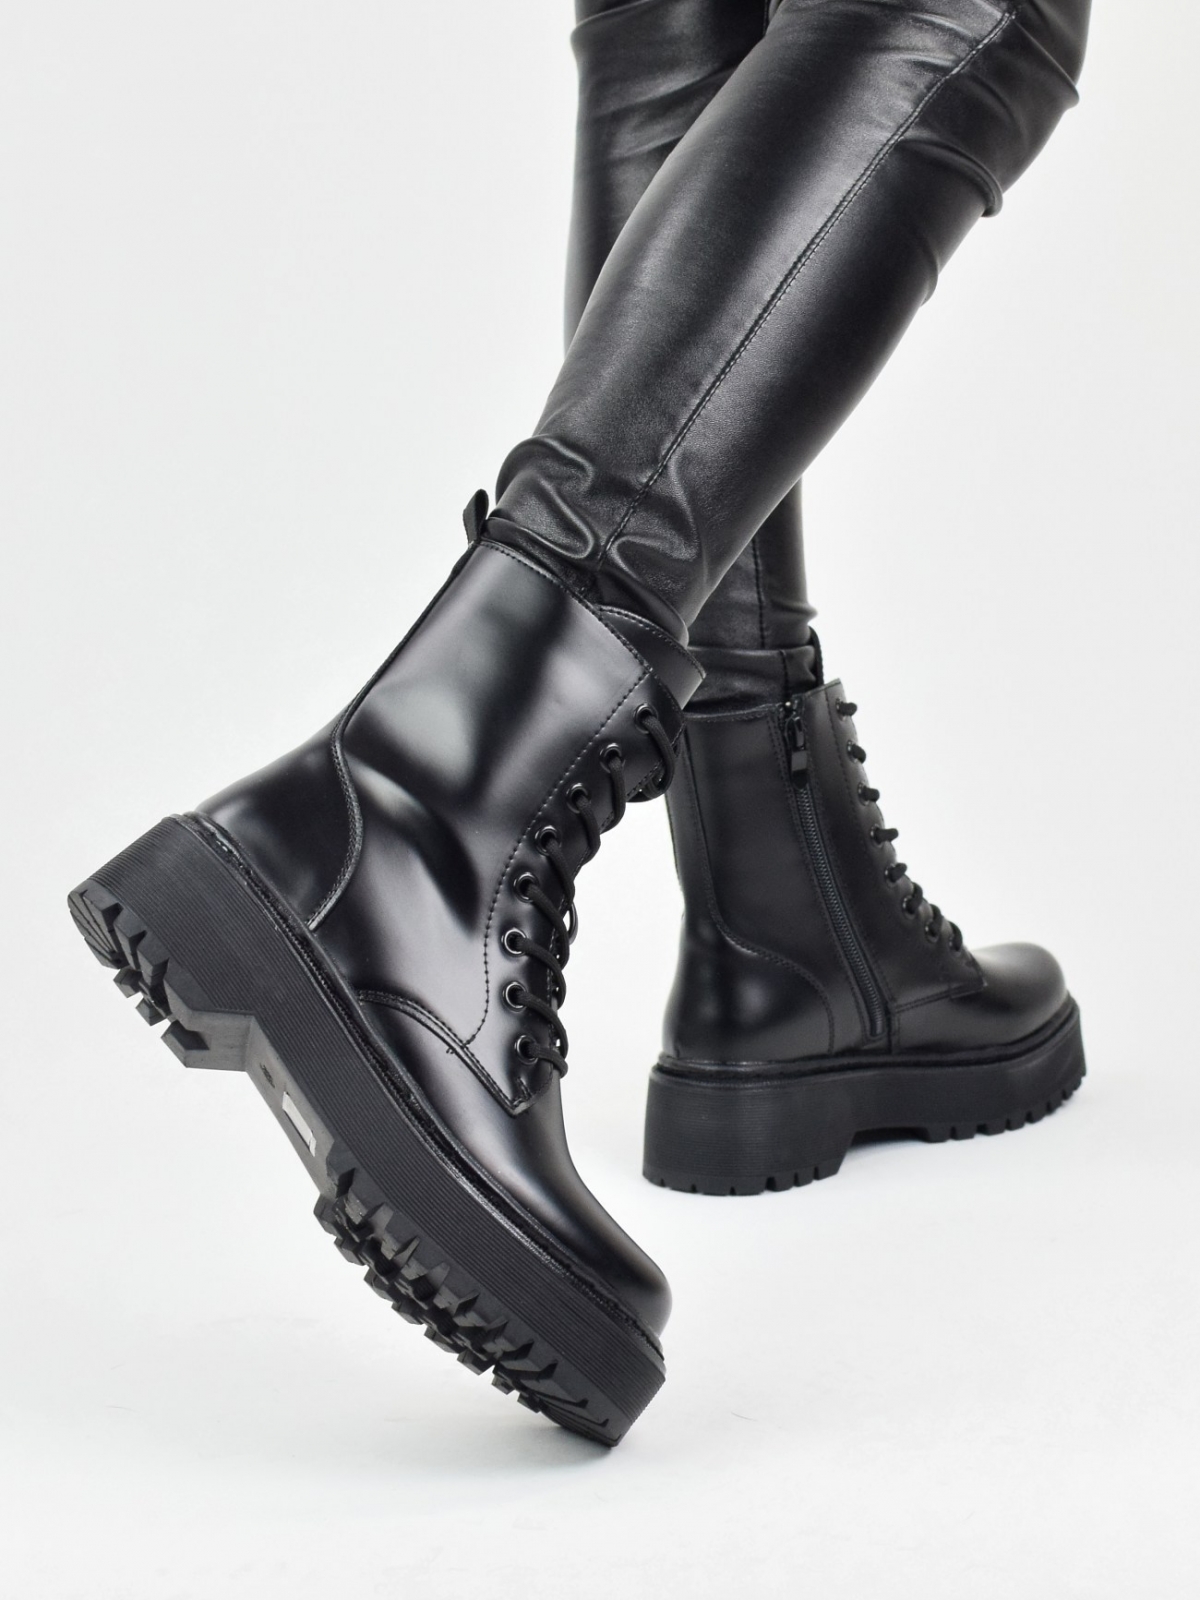 Classic design lace up ankle boots in black